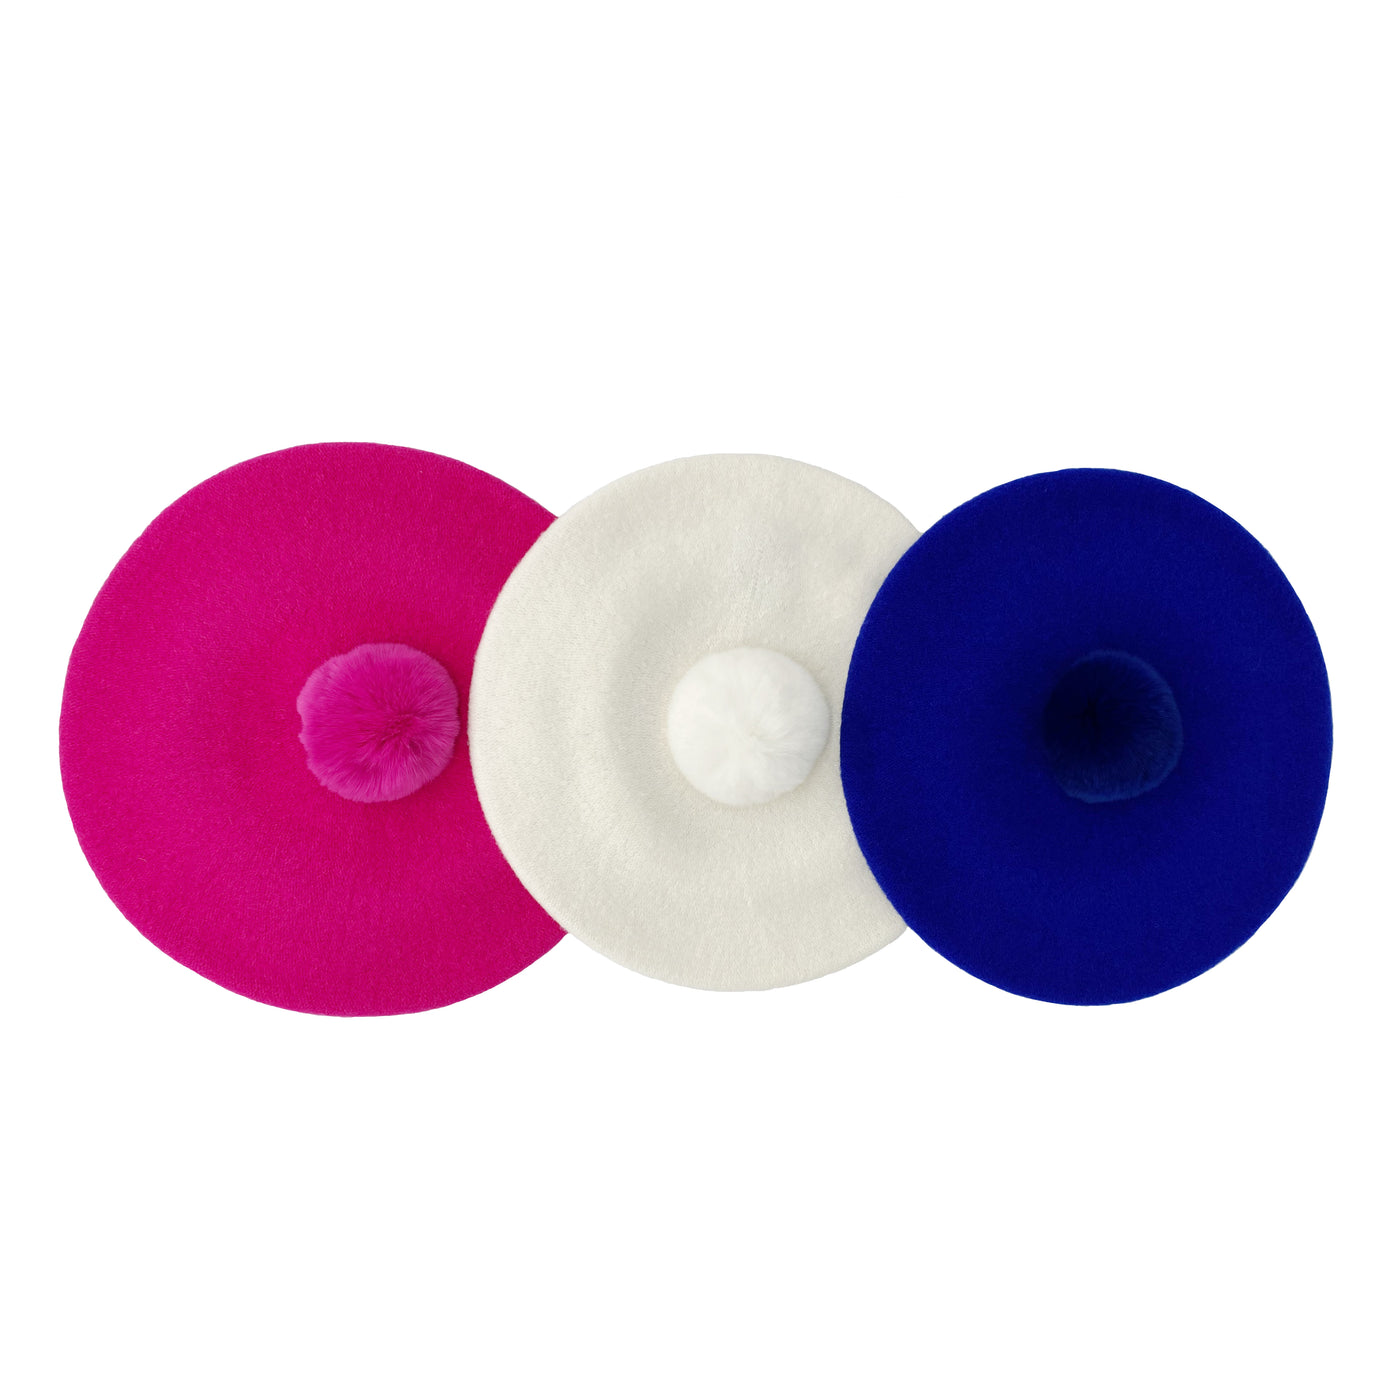 Photo of three berets with fur poms in royal blue, hot pink and white